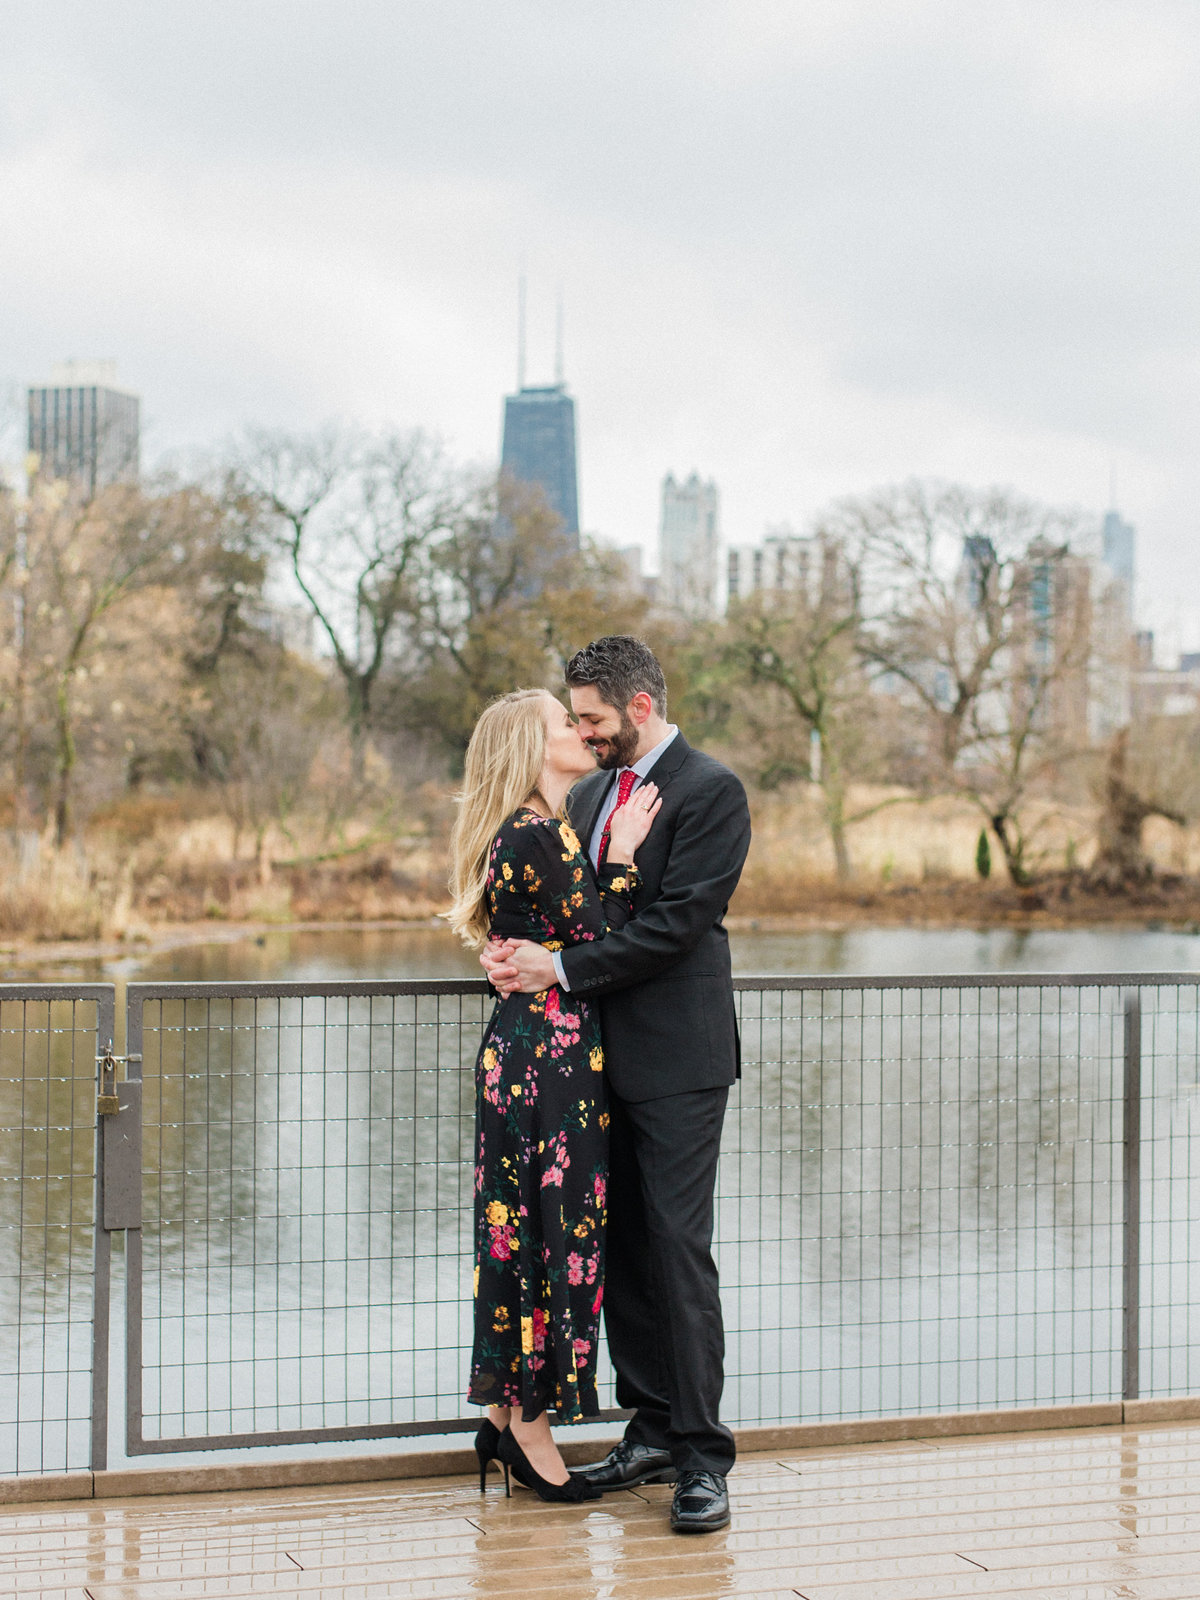 couple hugging on bridge wearing black gown and suit